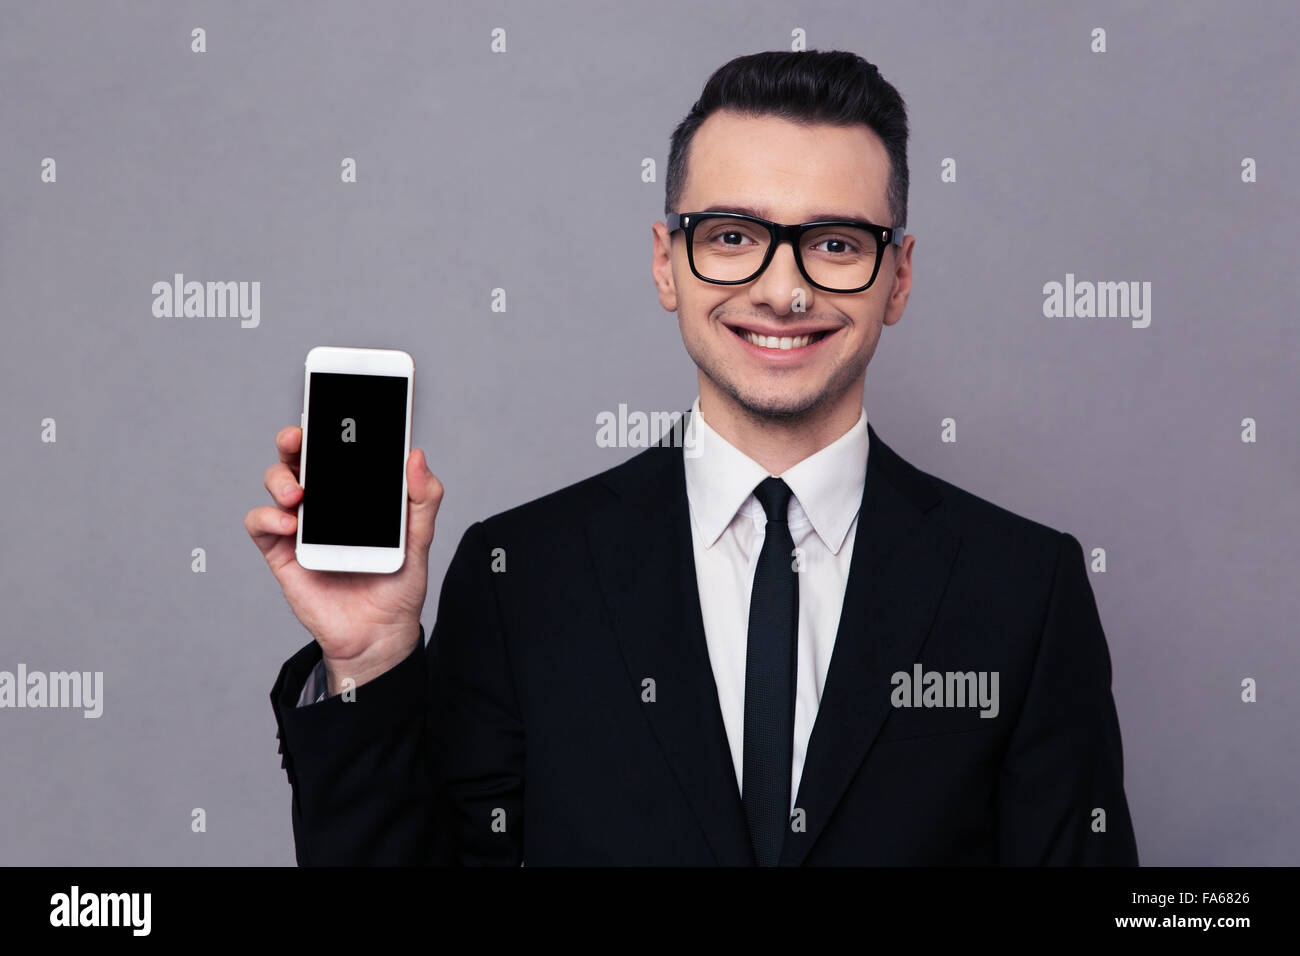 Portrait of a smiling businessman shoing blank smartphone screen over gray background Stock Photo